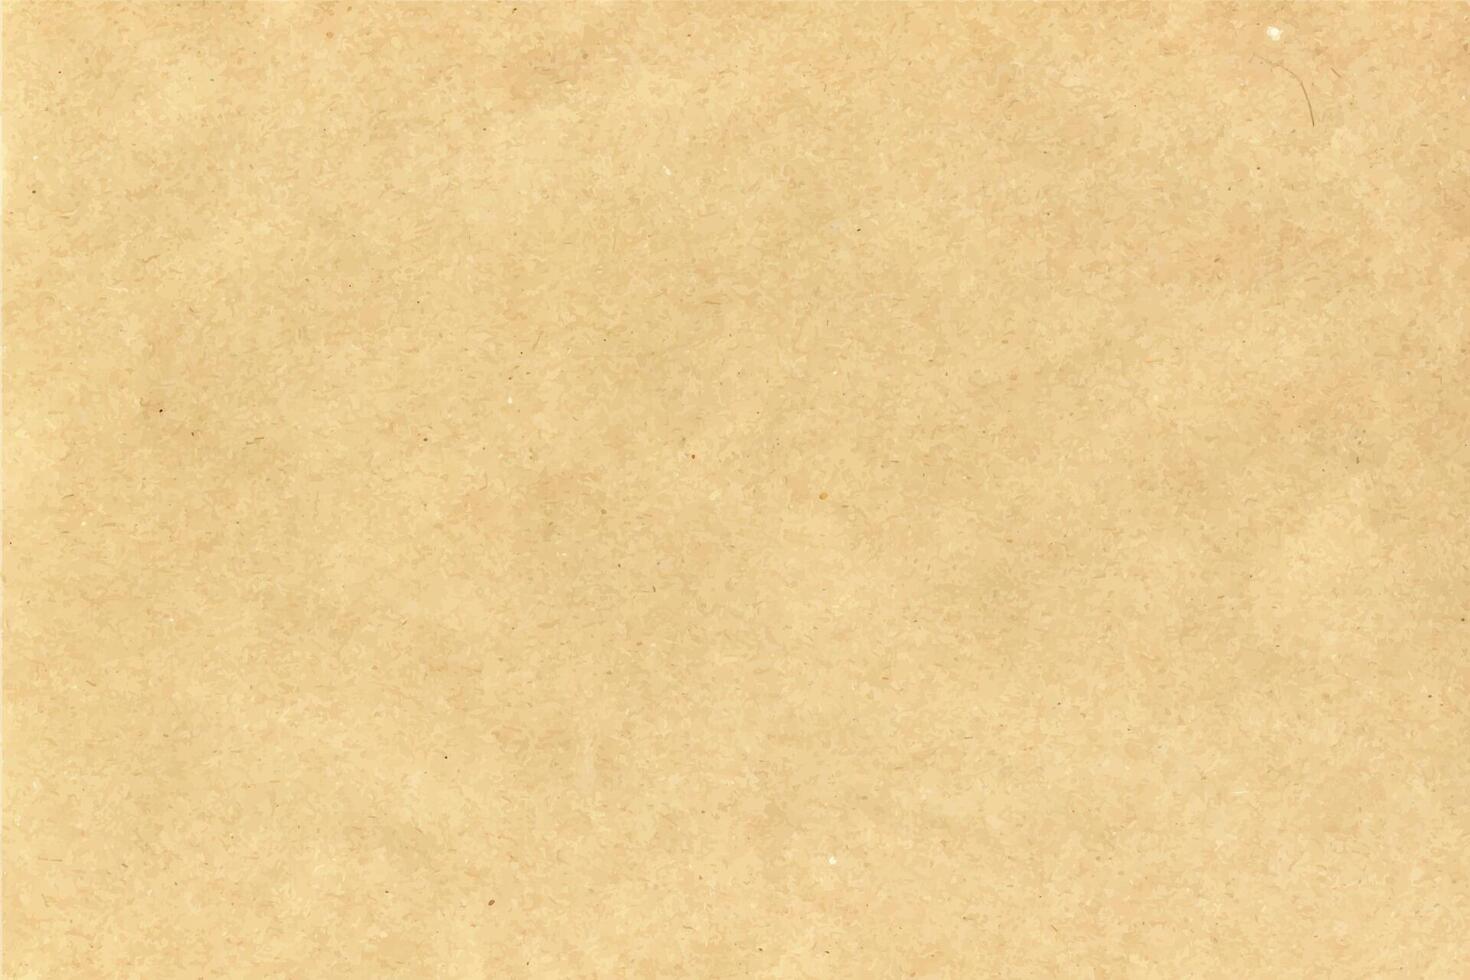 Brown kraft paper or cardboard texture background. A sheet of recycled kraft paper. Realistic vector illustration